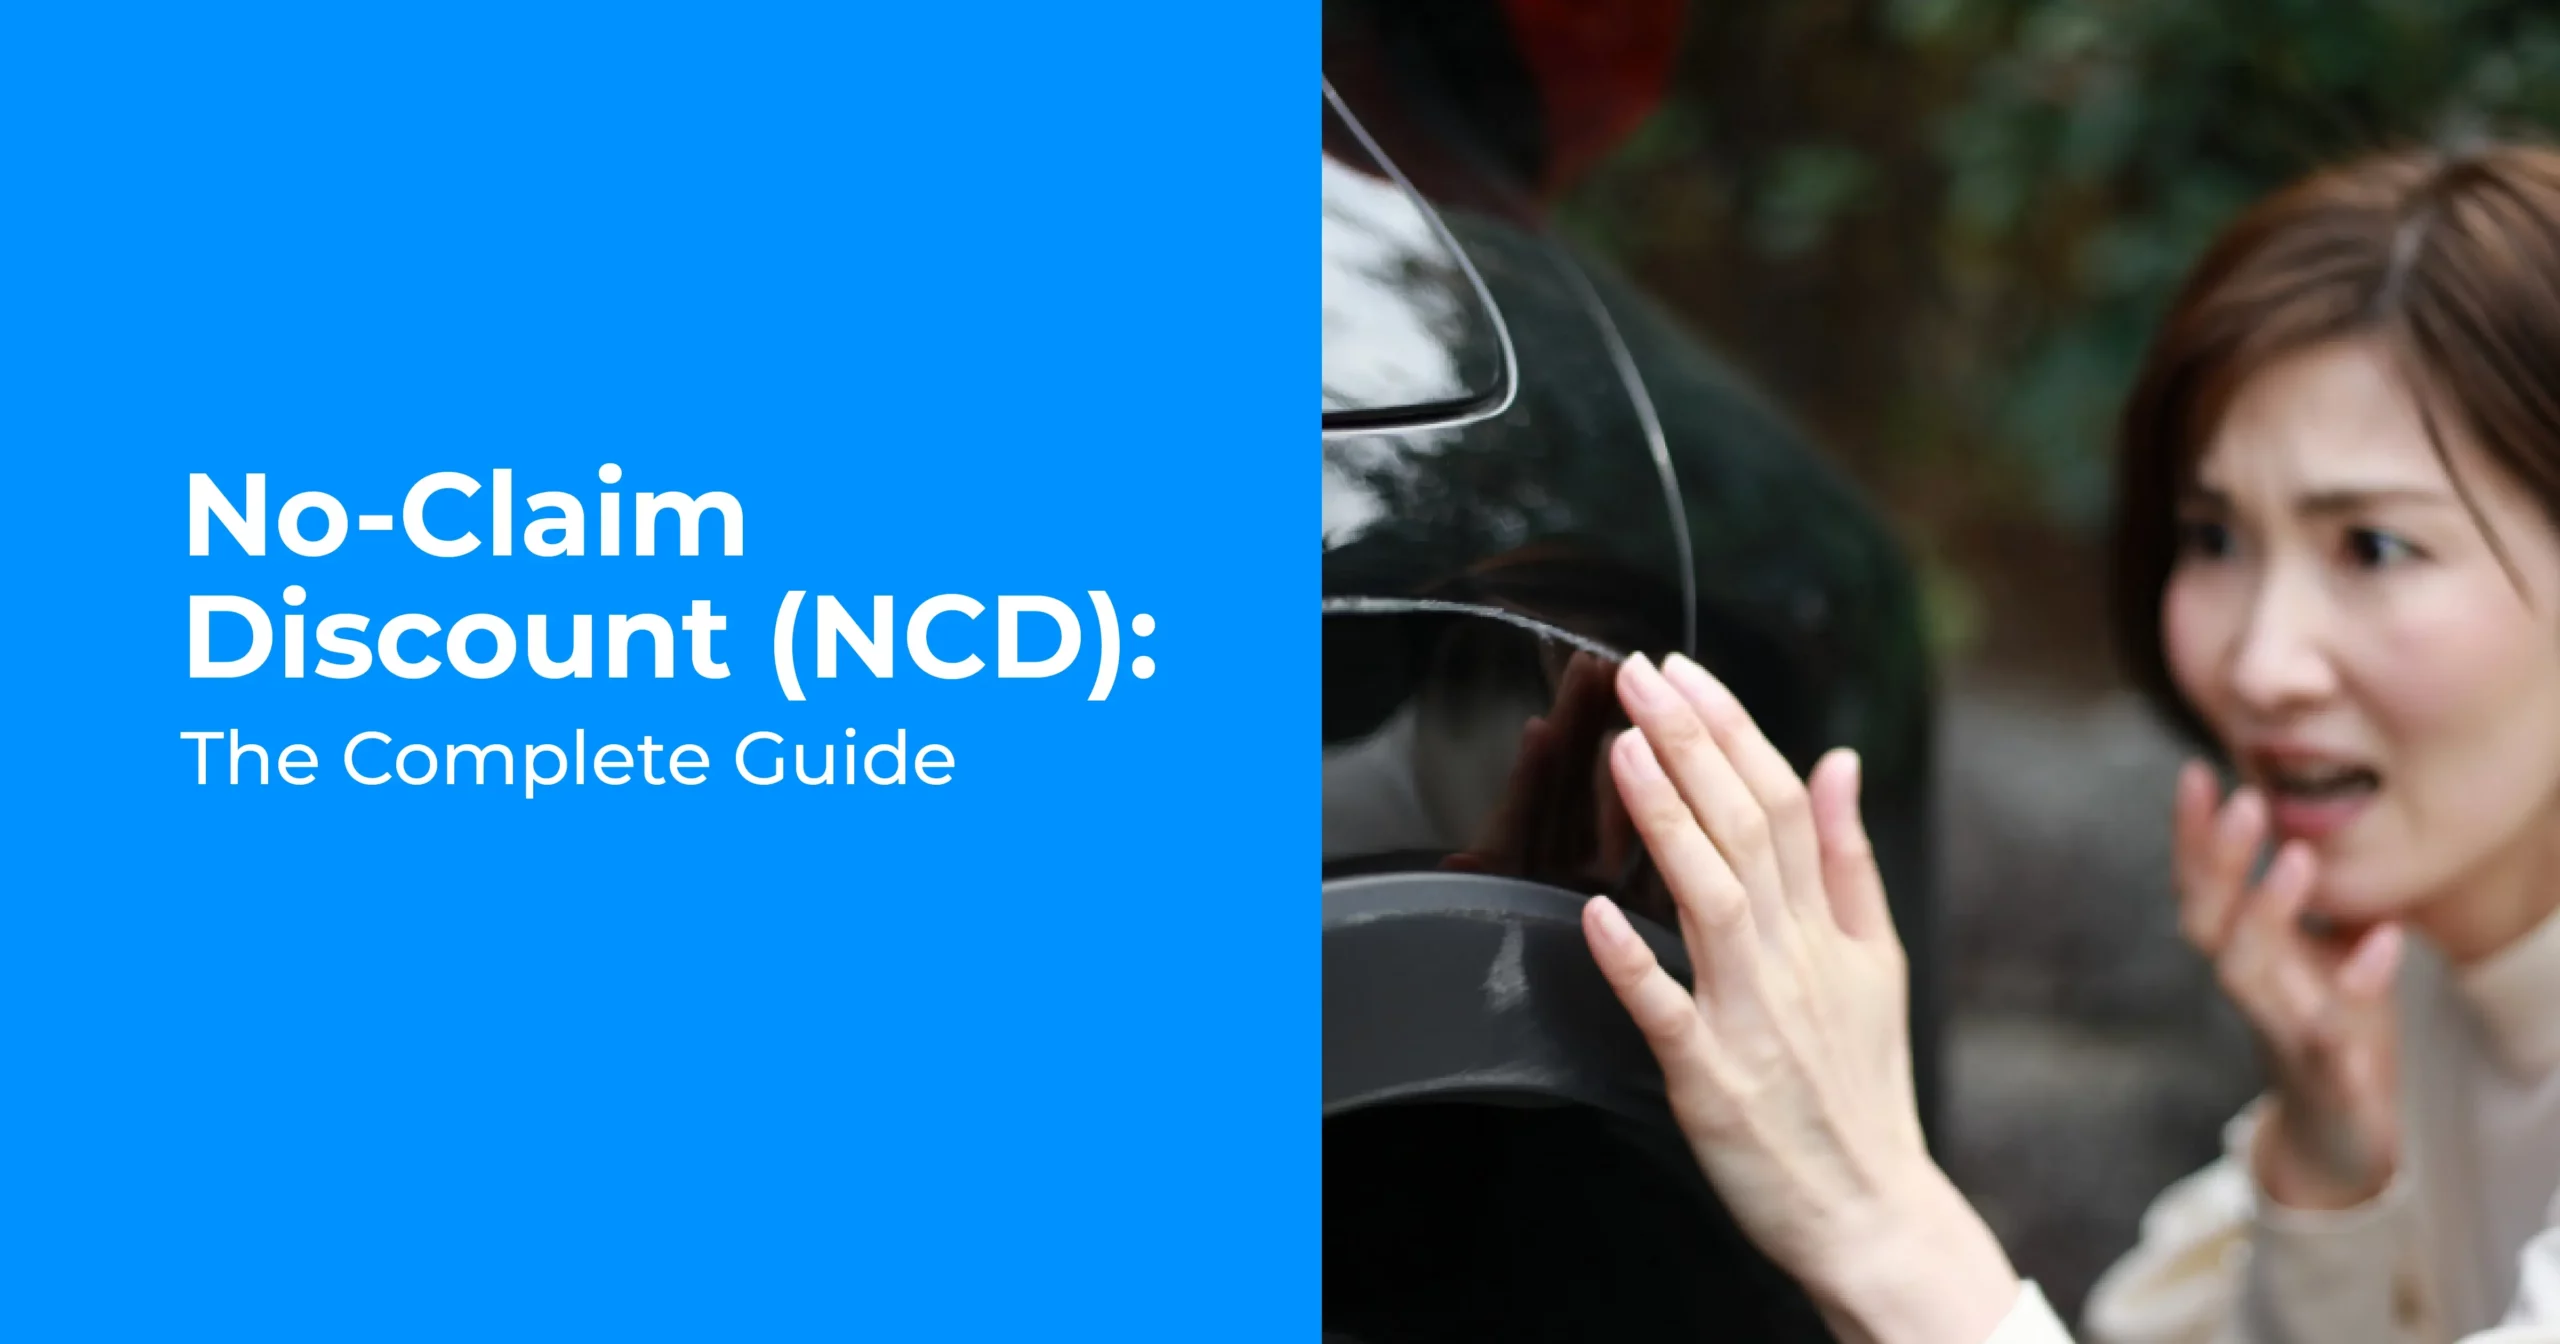 No-Claim Discount (NCD): The Complete Guide